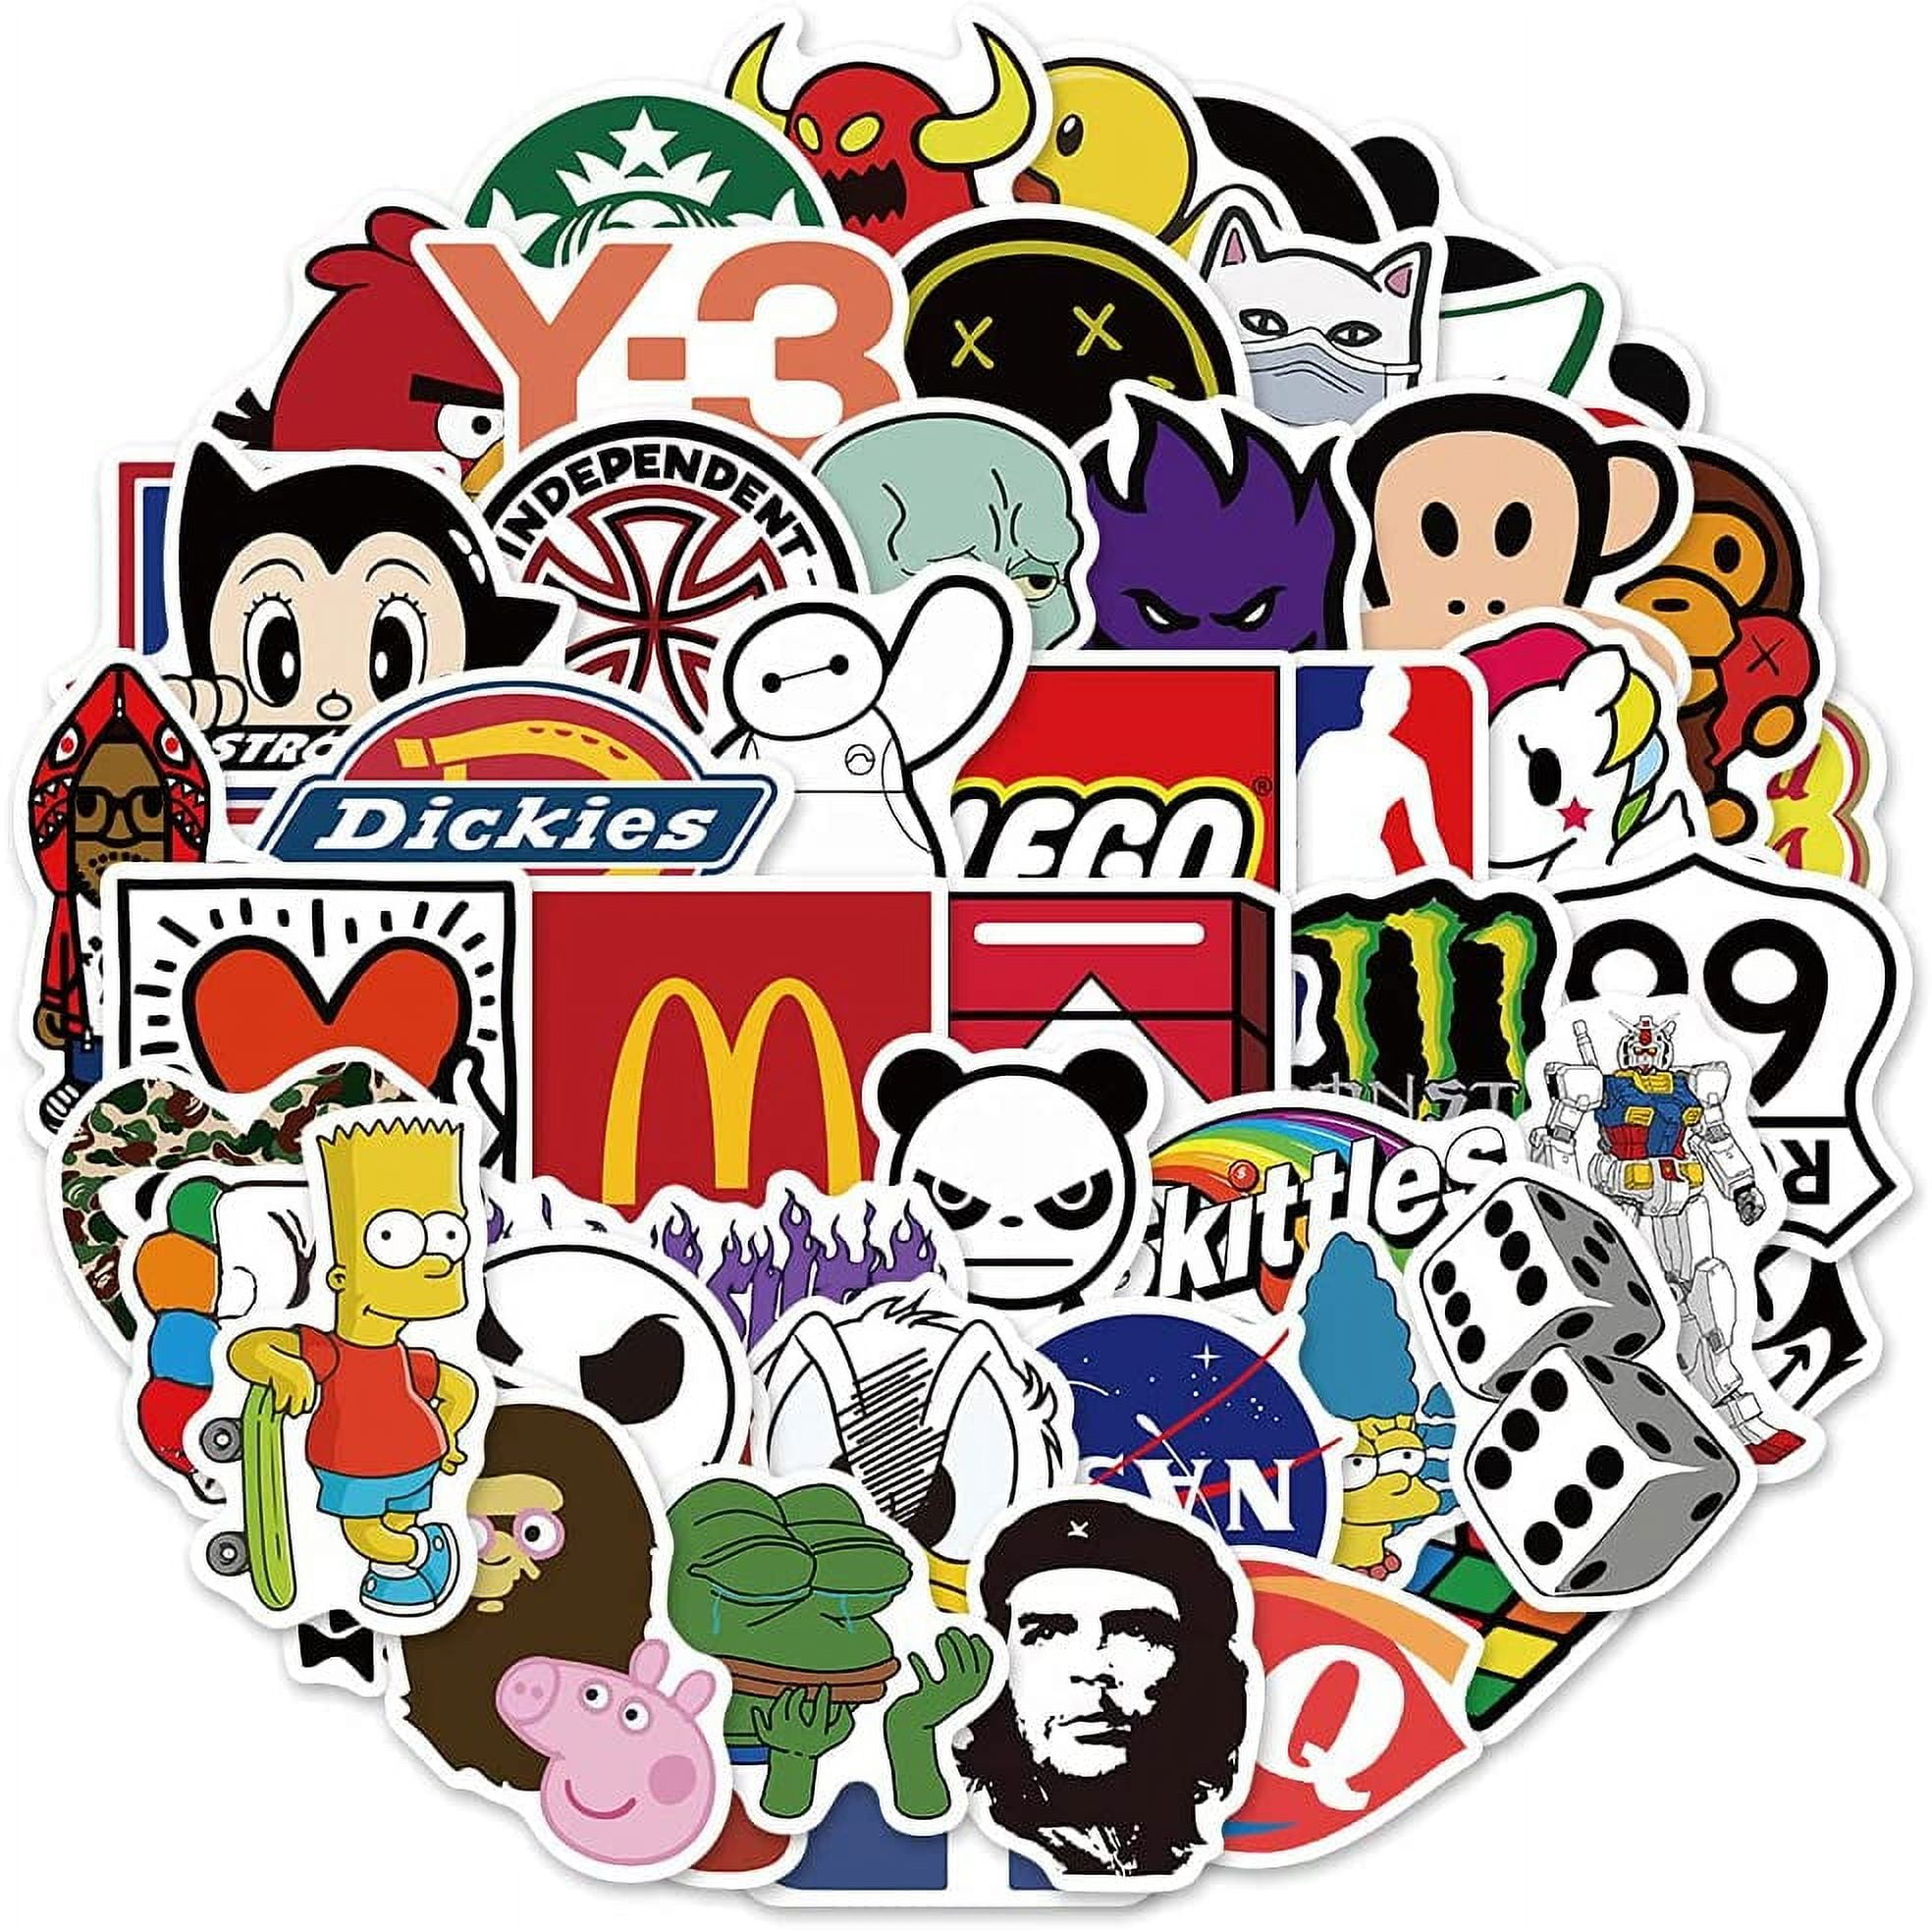 61pcs Vintage Book Stickers, Vinyl Waterproof Stickers For Laptop,  Skateboard, Water Bottles, Computer, Phone, Cartoon Stickers, Shop The  Latest Trends